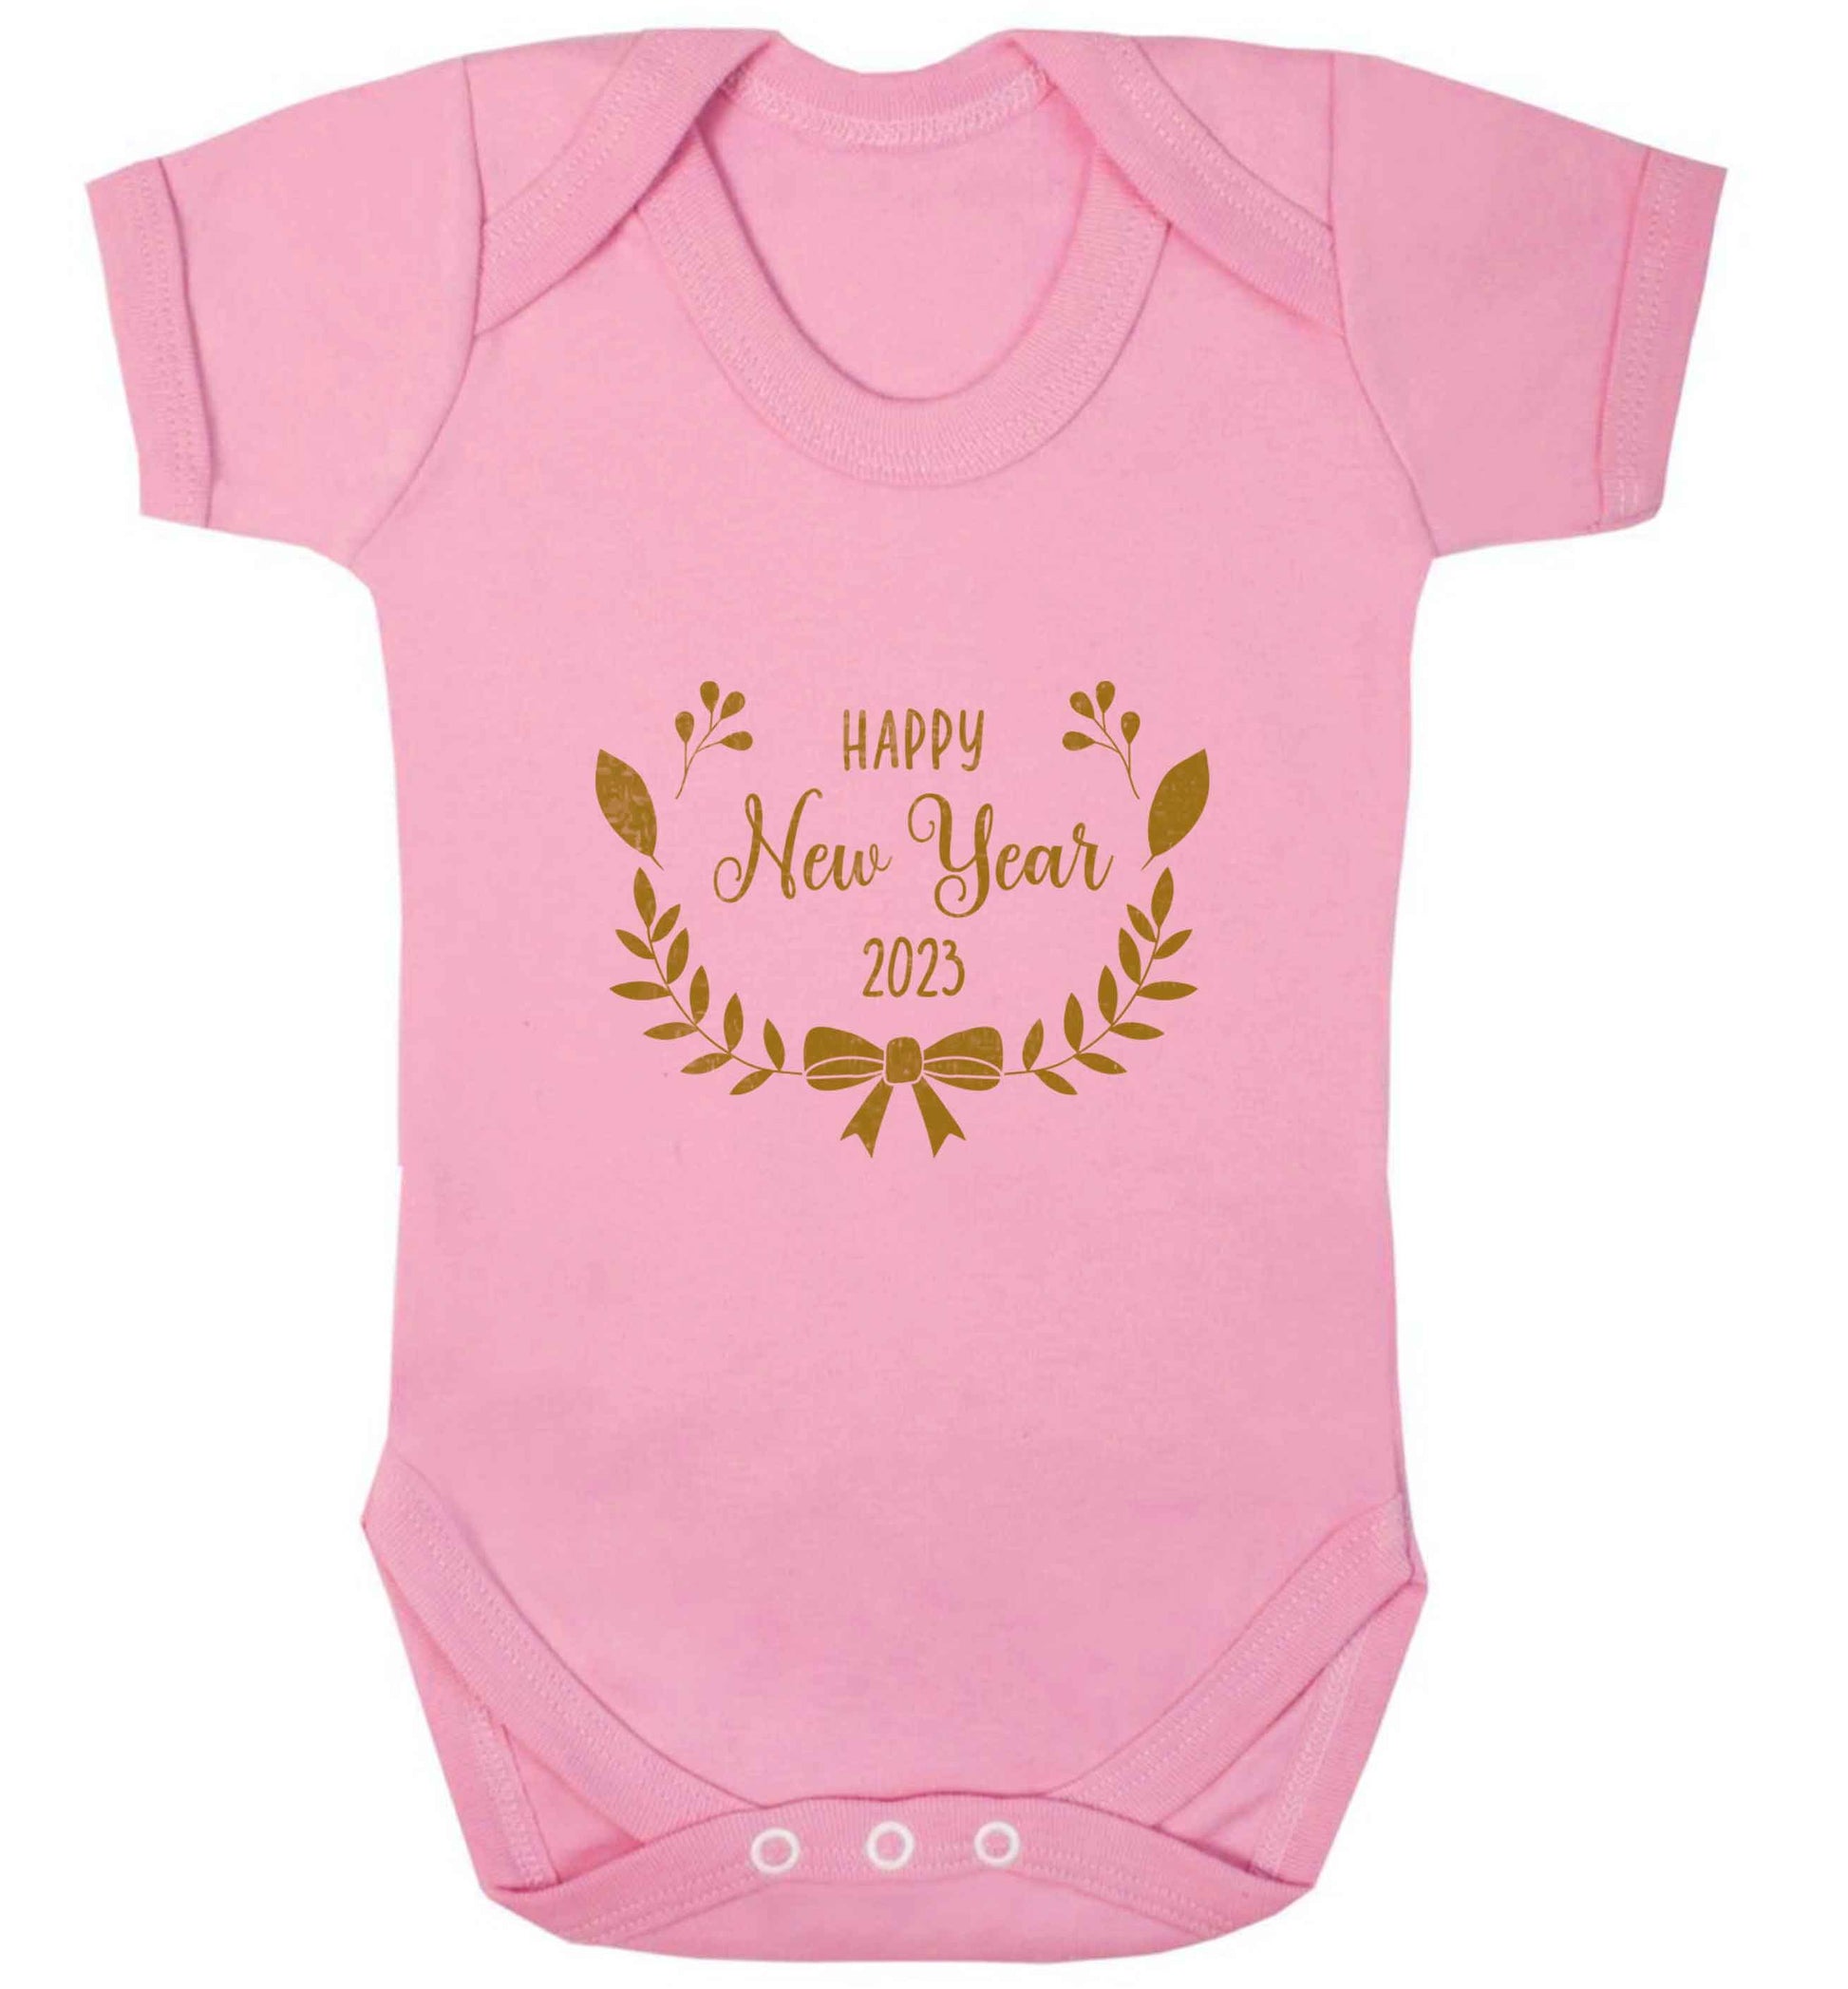 Happy New Year 2023 baby vest pale pink 18-24 months